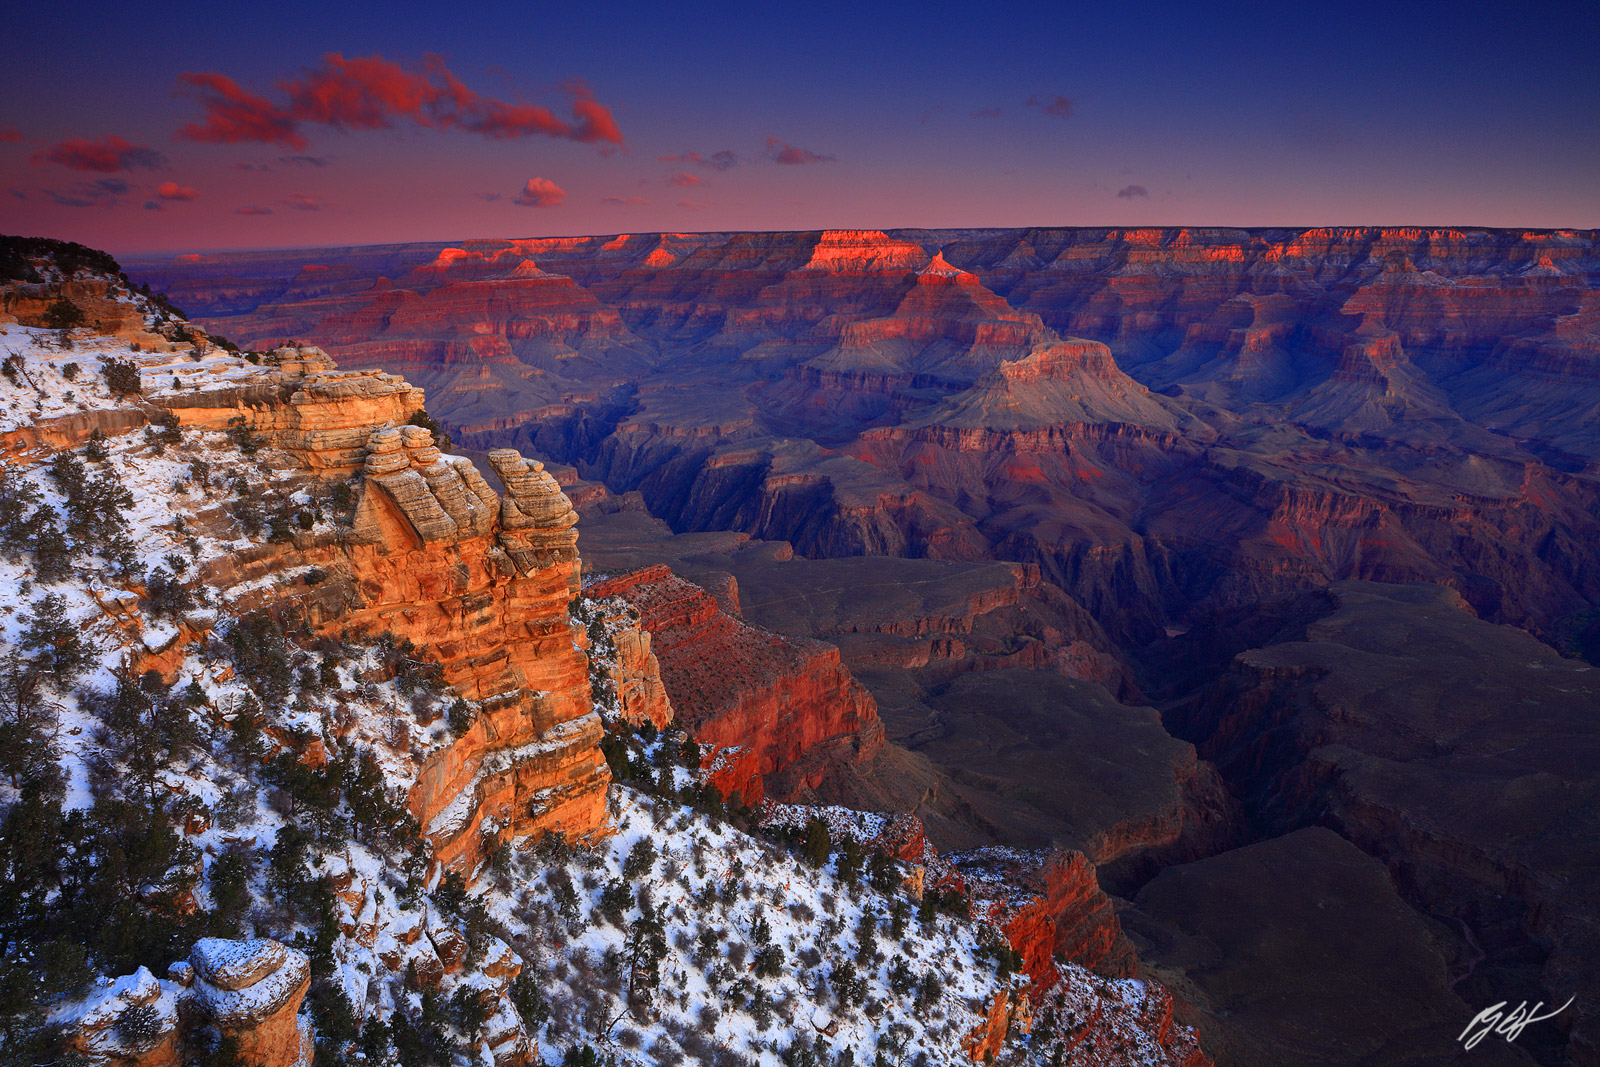 Sunrise and Fresh Snow from the South Rim of the Gand Canyon in Grand Canyon National Park in Arizona